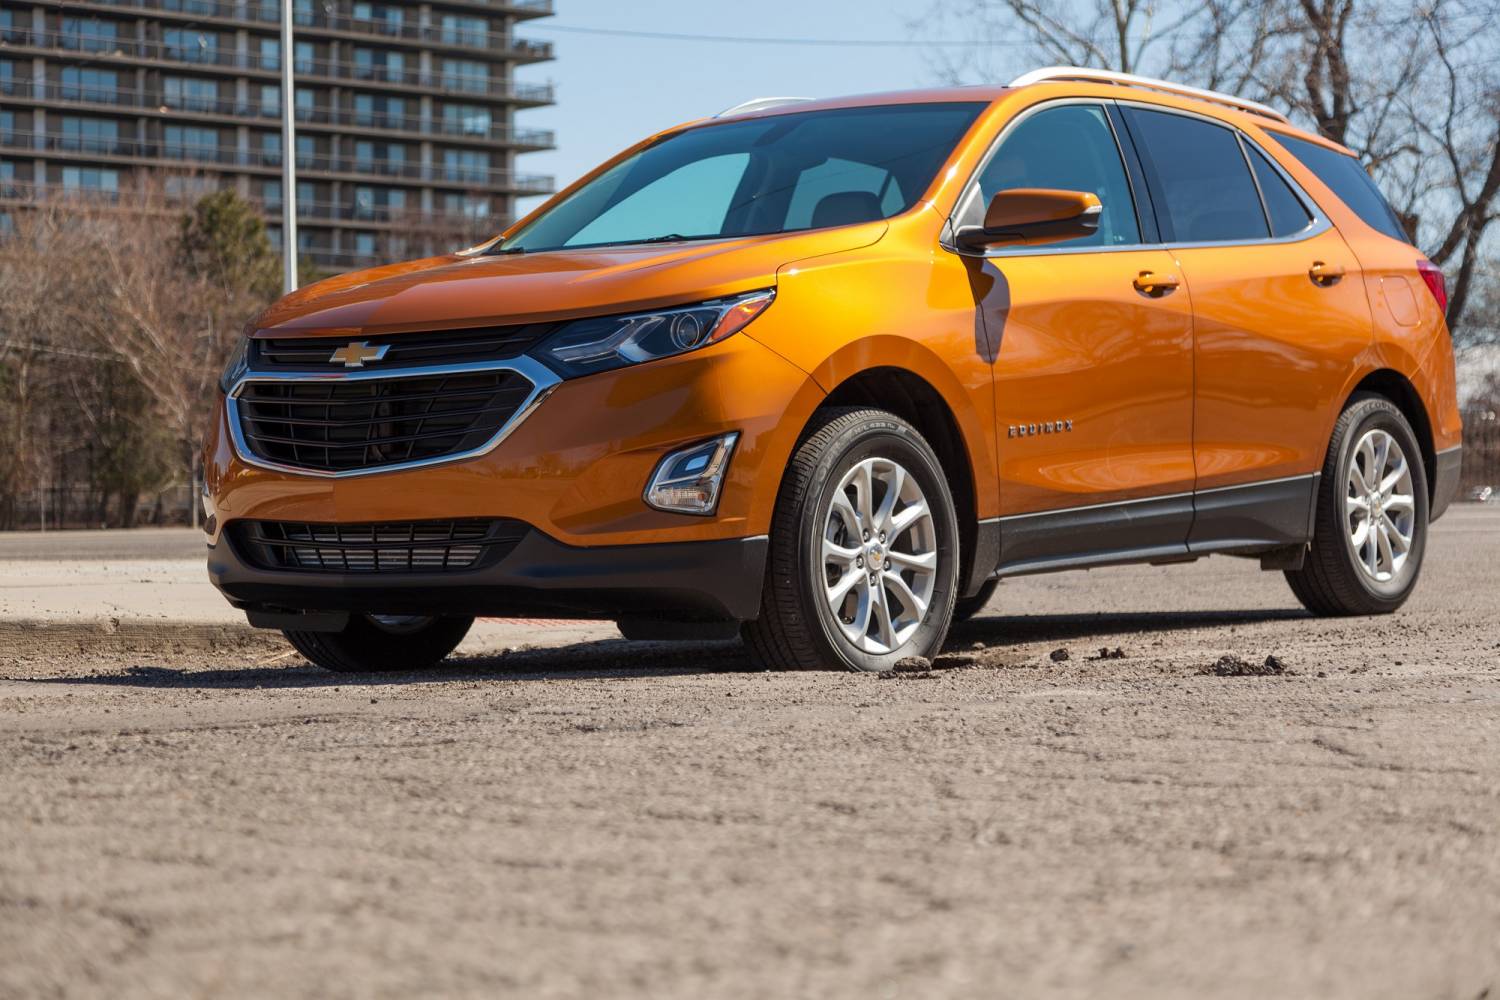 2018 Chevy Equinox Is Lighter And Smaller